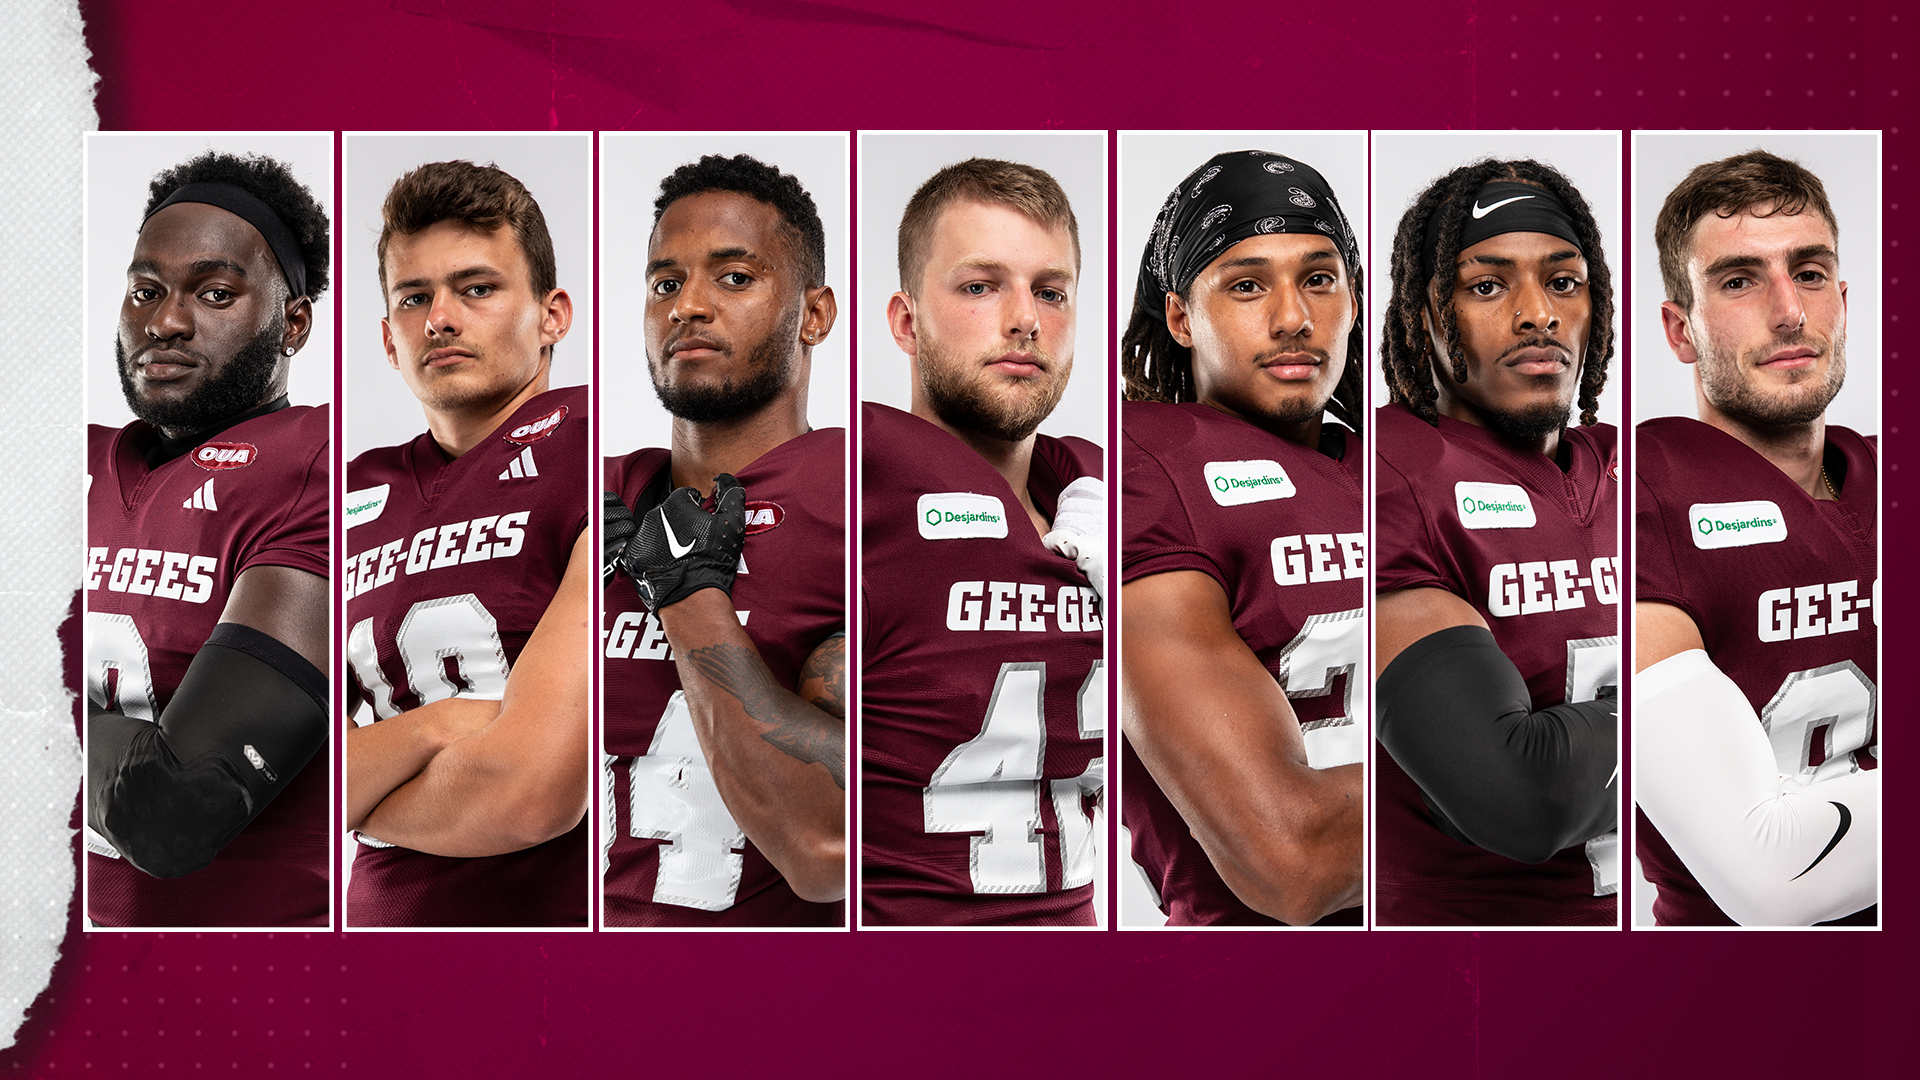 Seven Gee-Gees award winners posing in their uniforms from a pre-season photoshoot Thumbnail